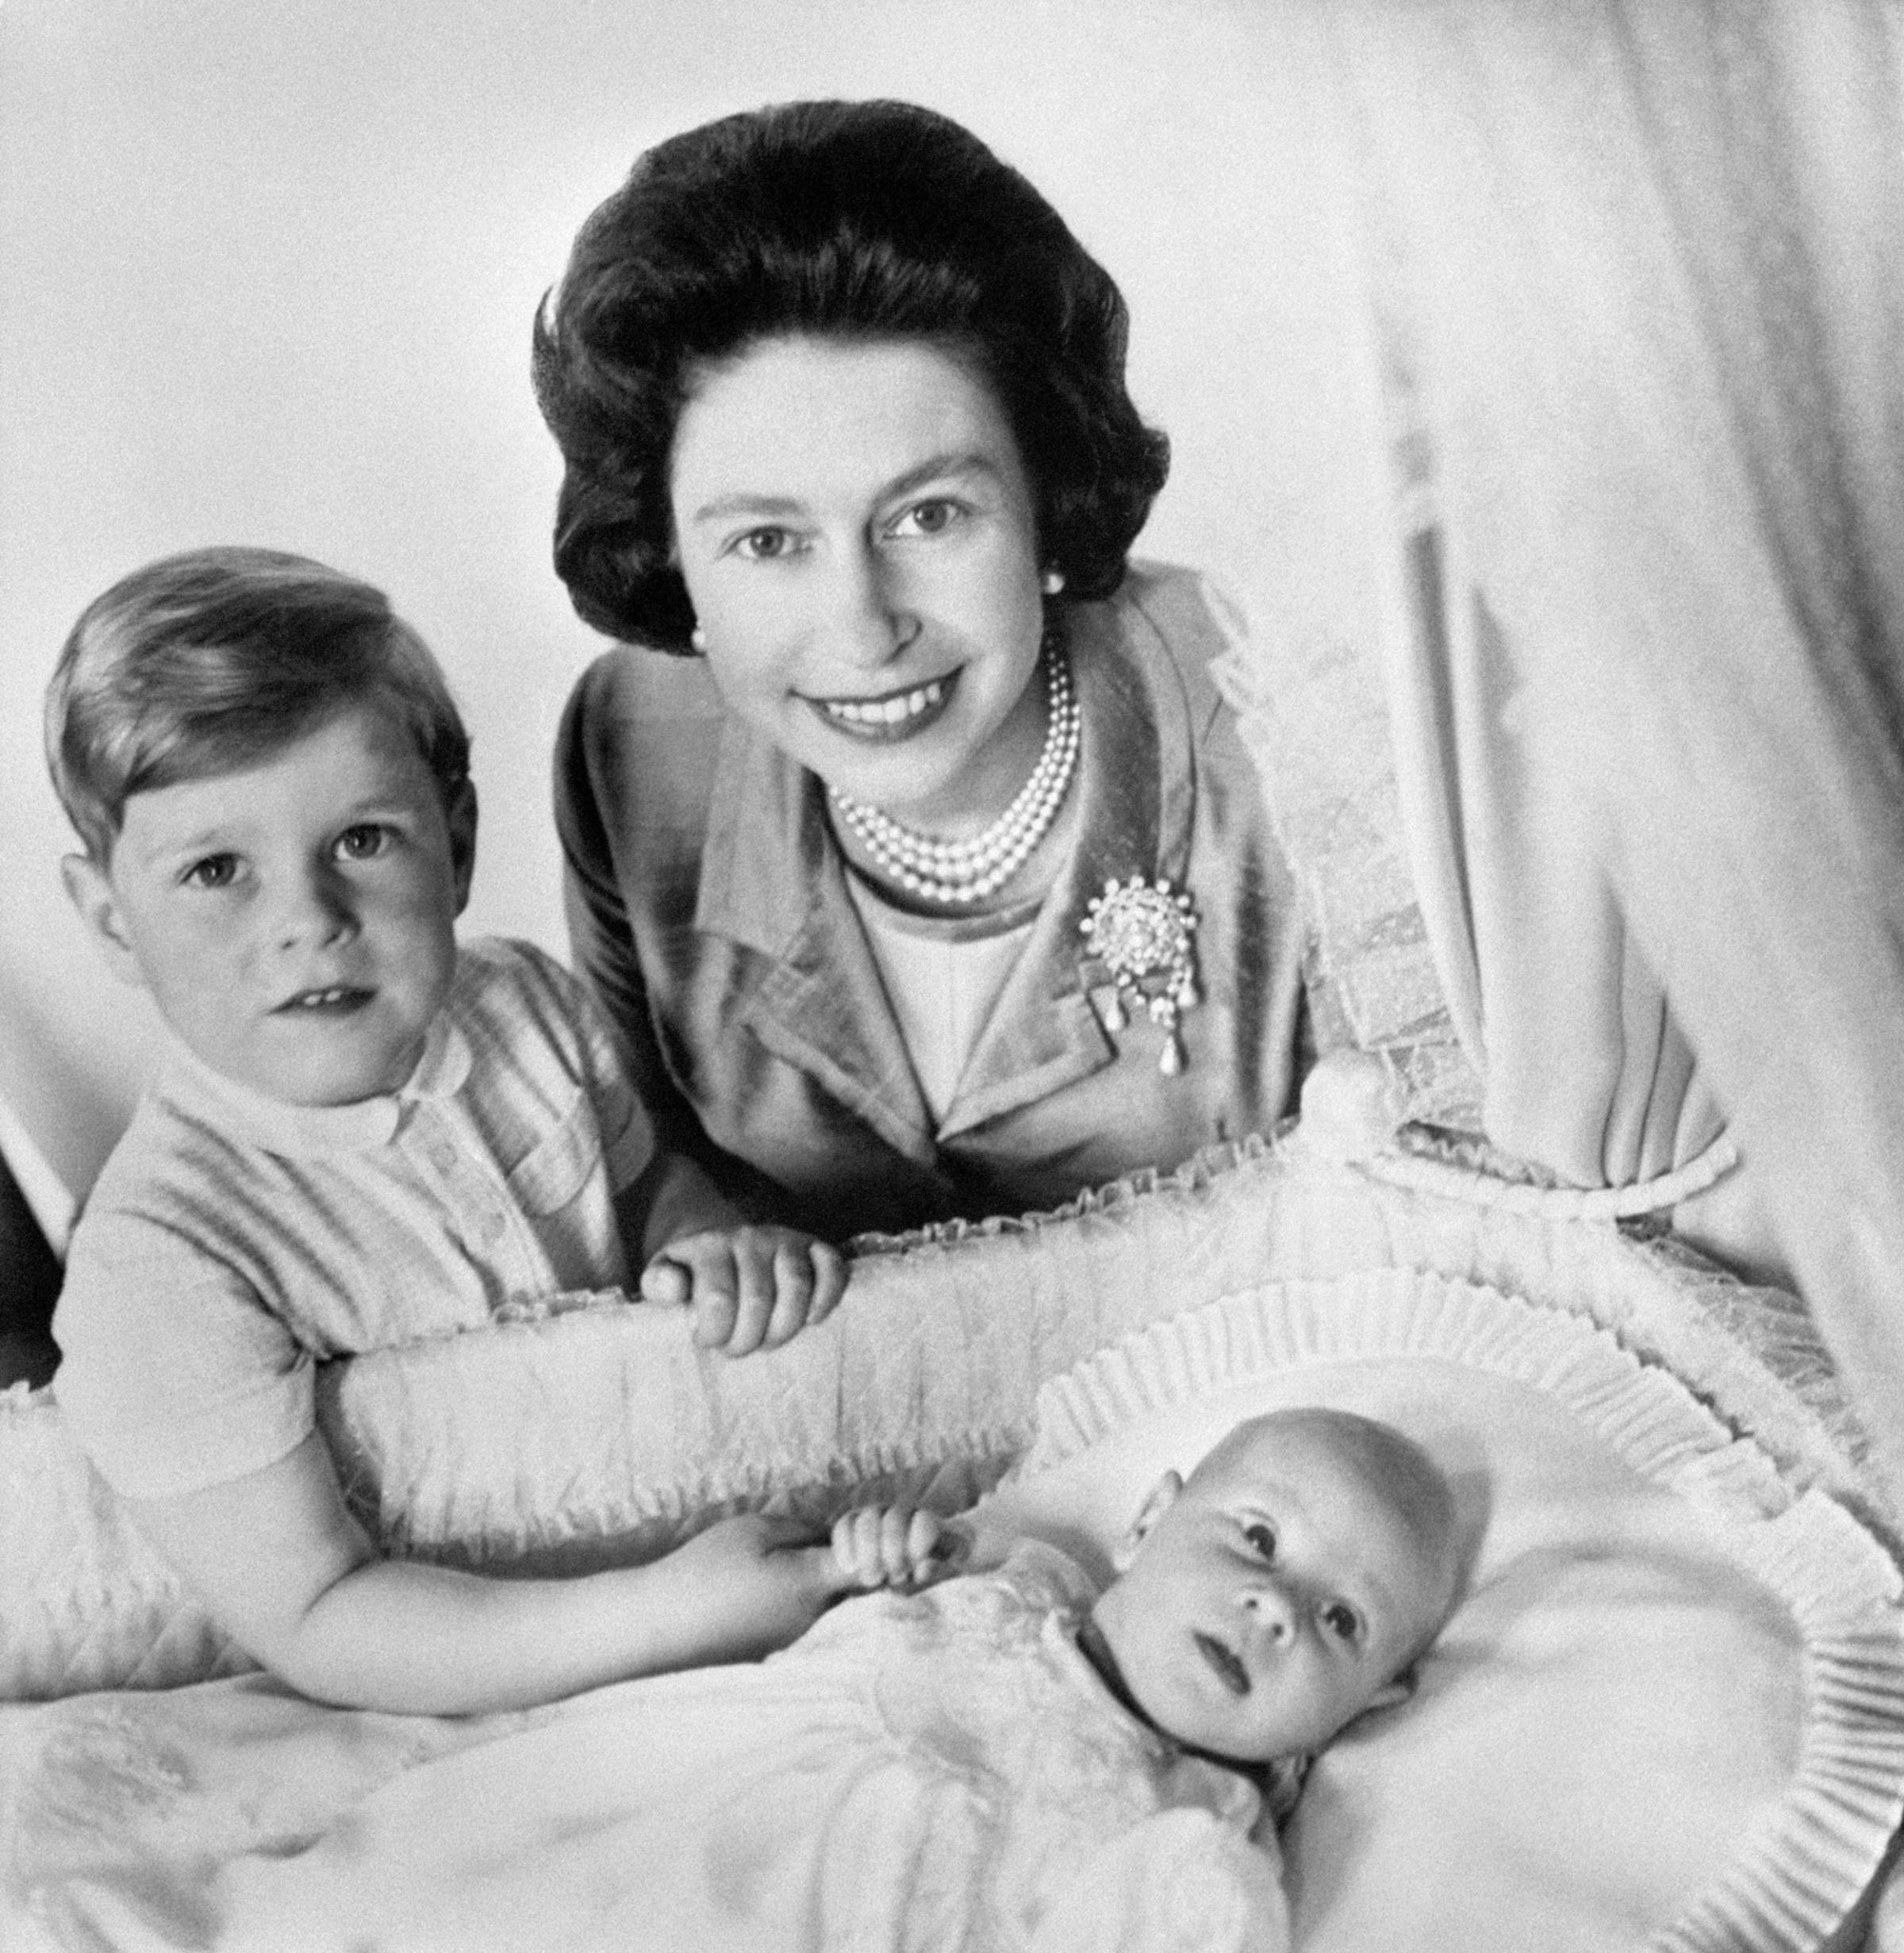 This 1964 snap of Prince Edward in his cot, with brother Andrew and his mother, the Queen, already suggests an interest in what's going on behind the camera. He went on to found a TV production company in 1993.